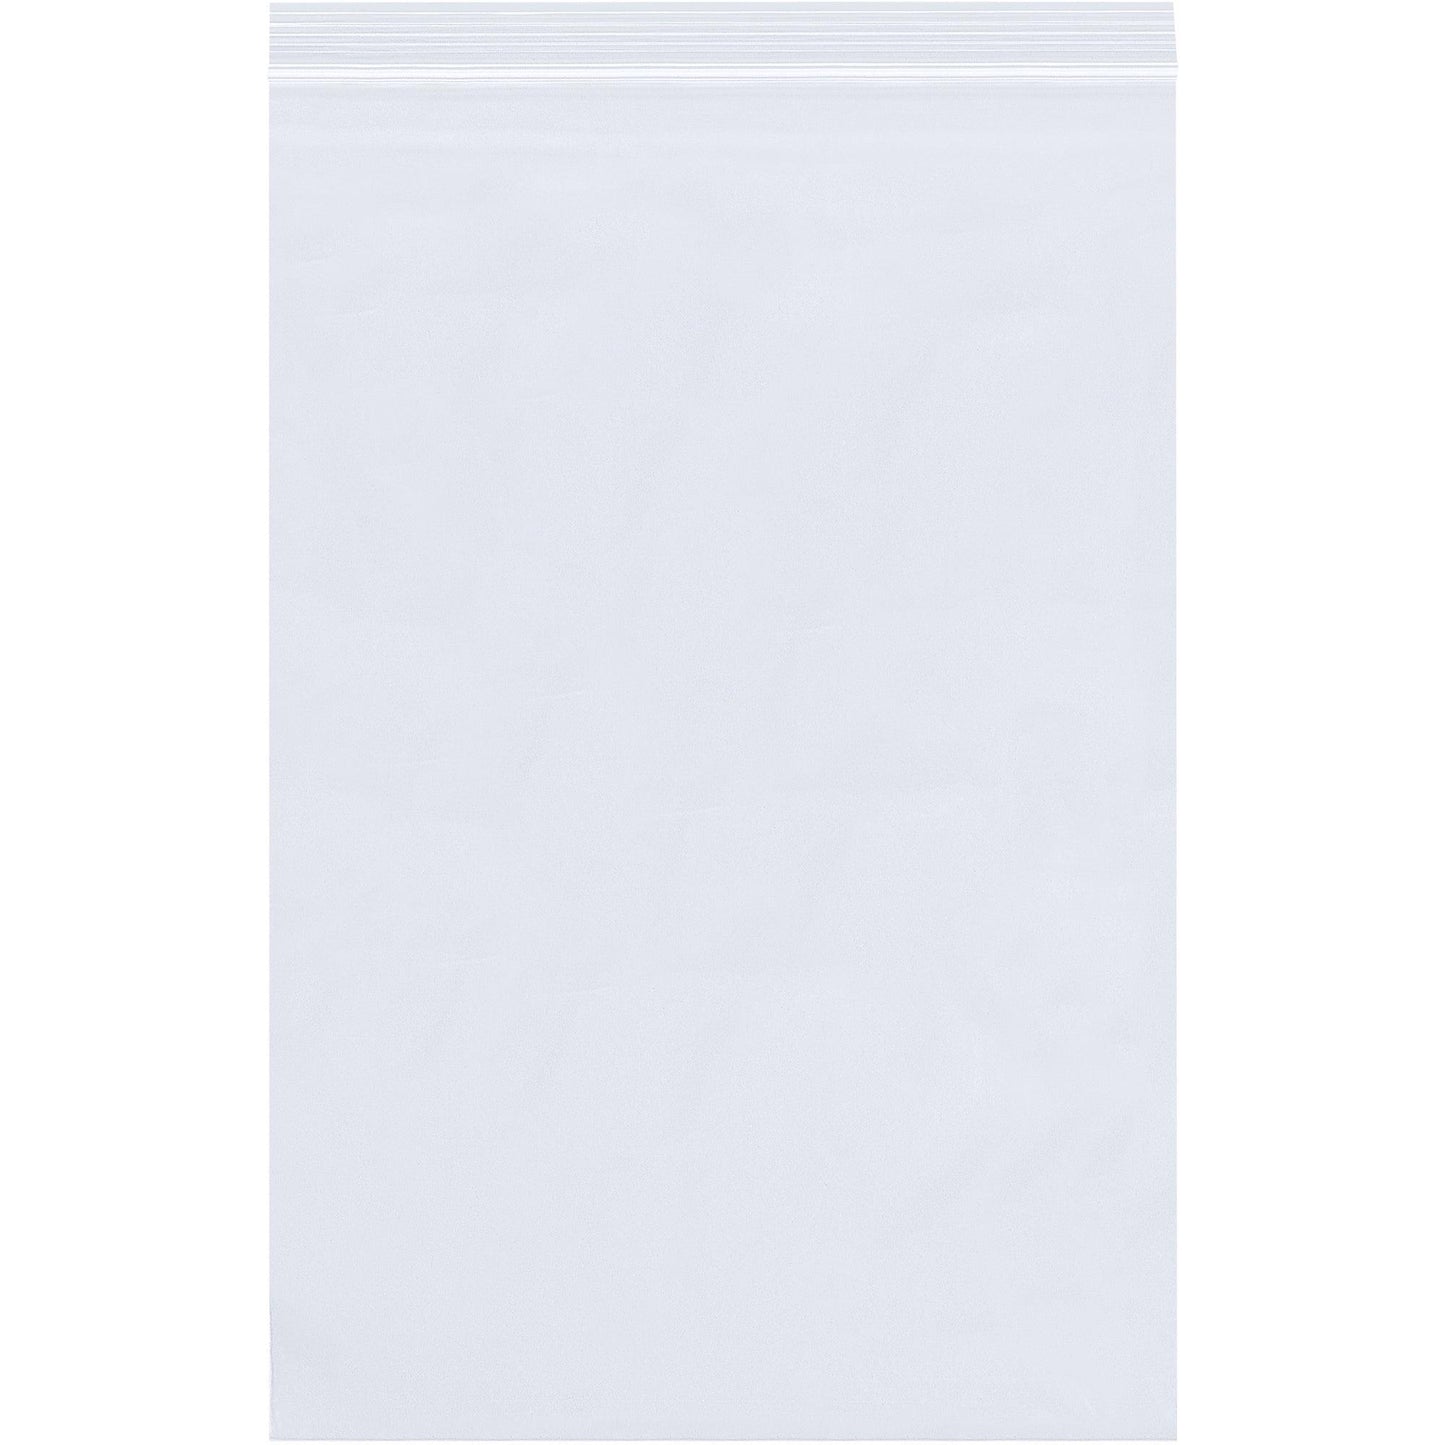 12 x 12" - 8 Mil Reclosable Poly Bags - PB3920